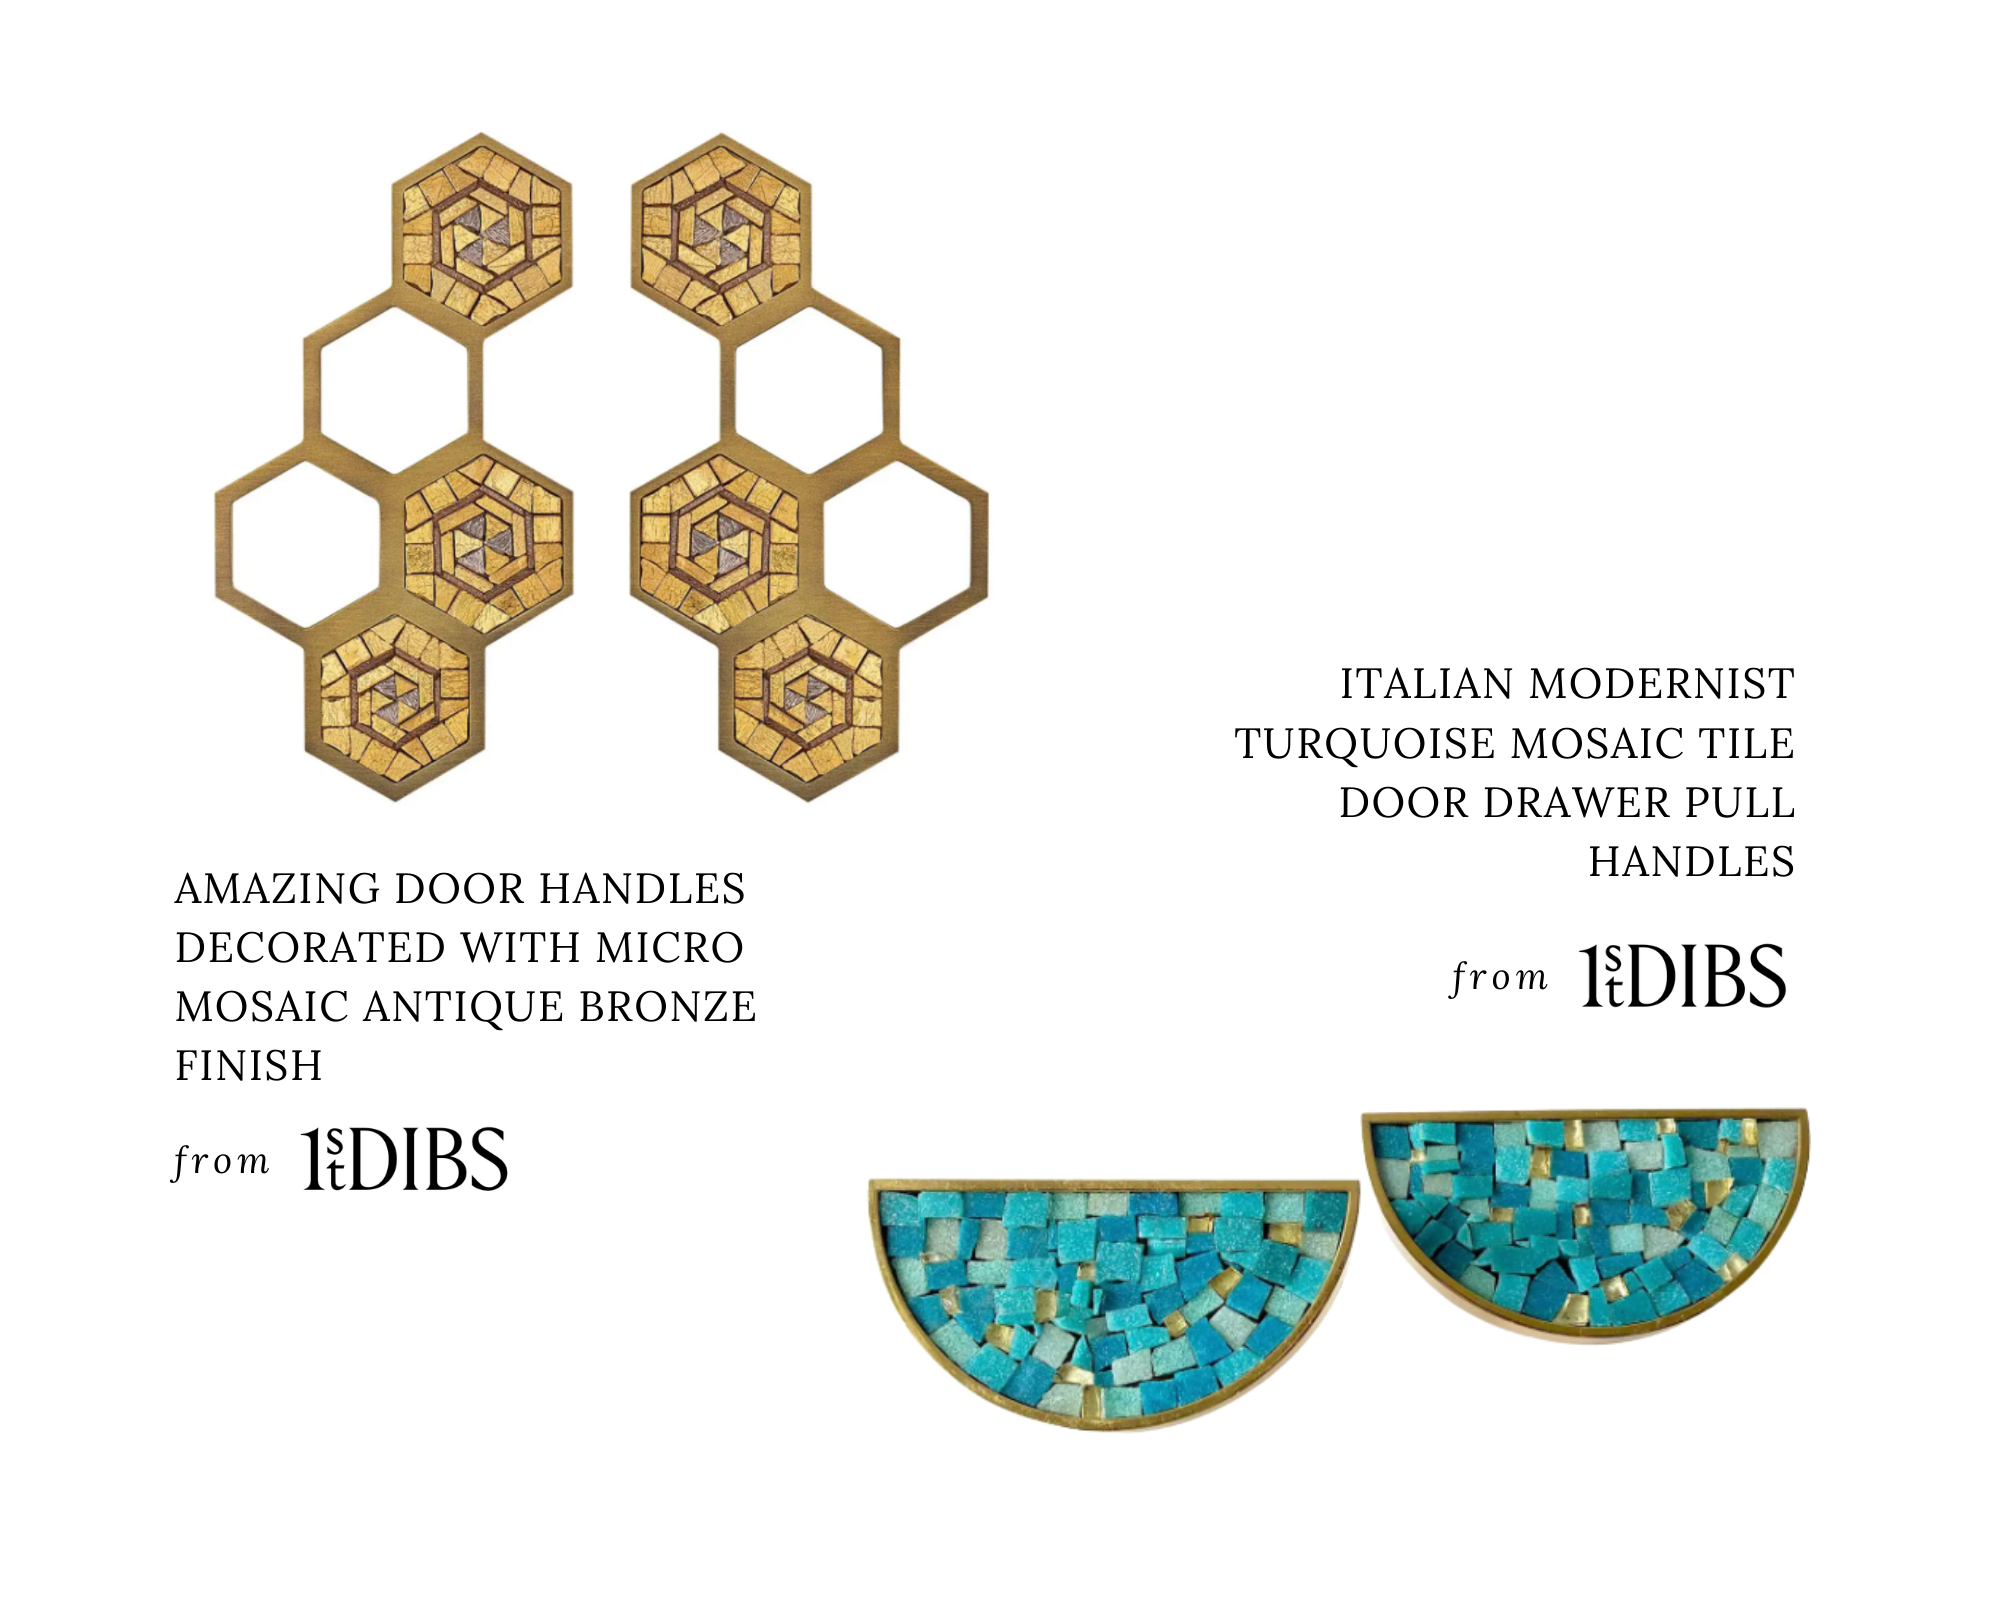 Consider textural pieces like these Italian Modernist Turquoise Mosaic Tile Drawer Pulls.